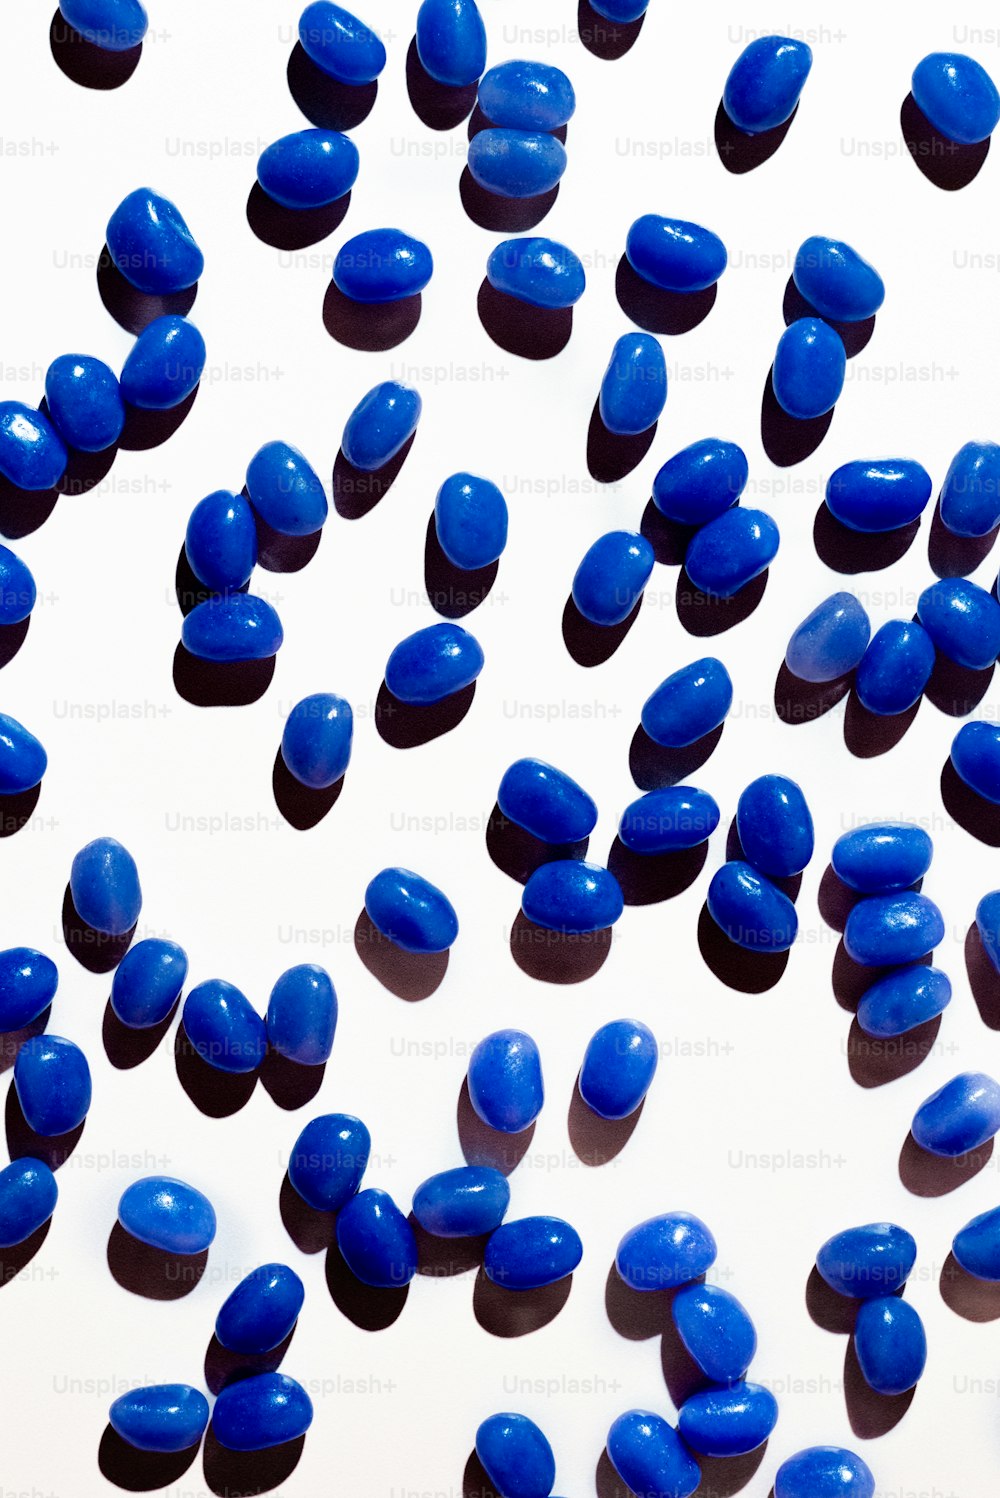 many blue pills are scattered on a white surface